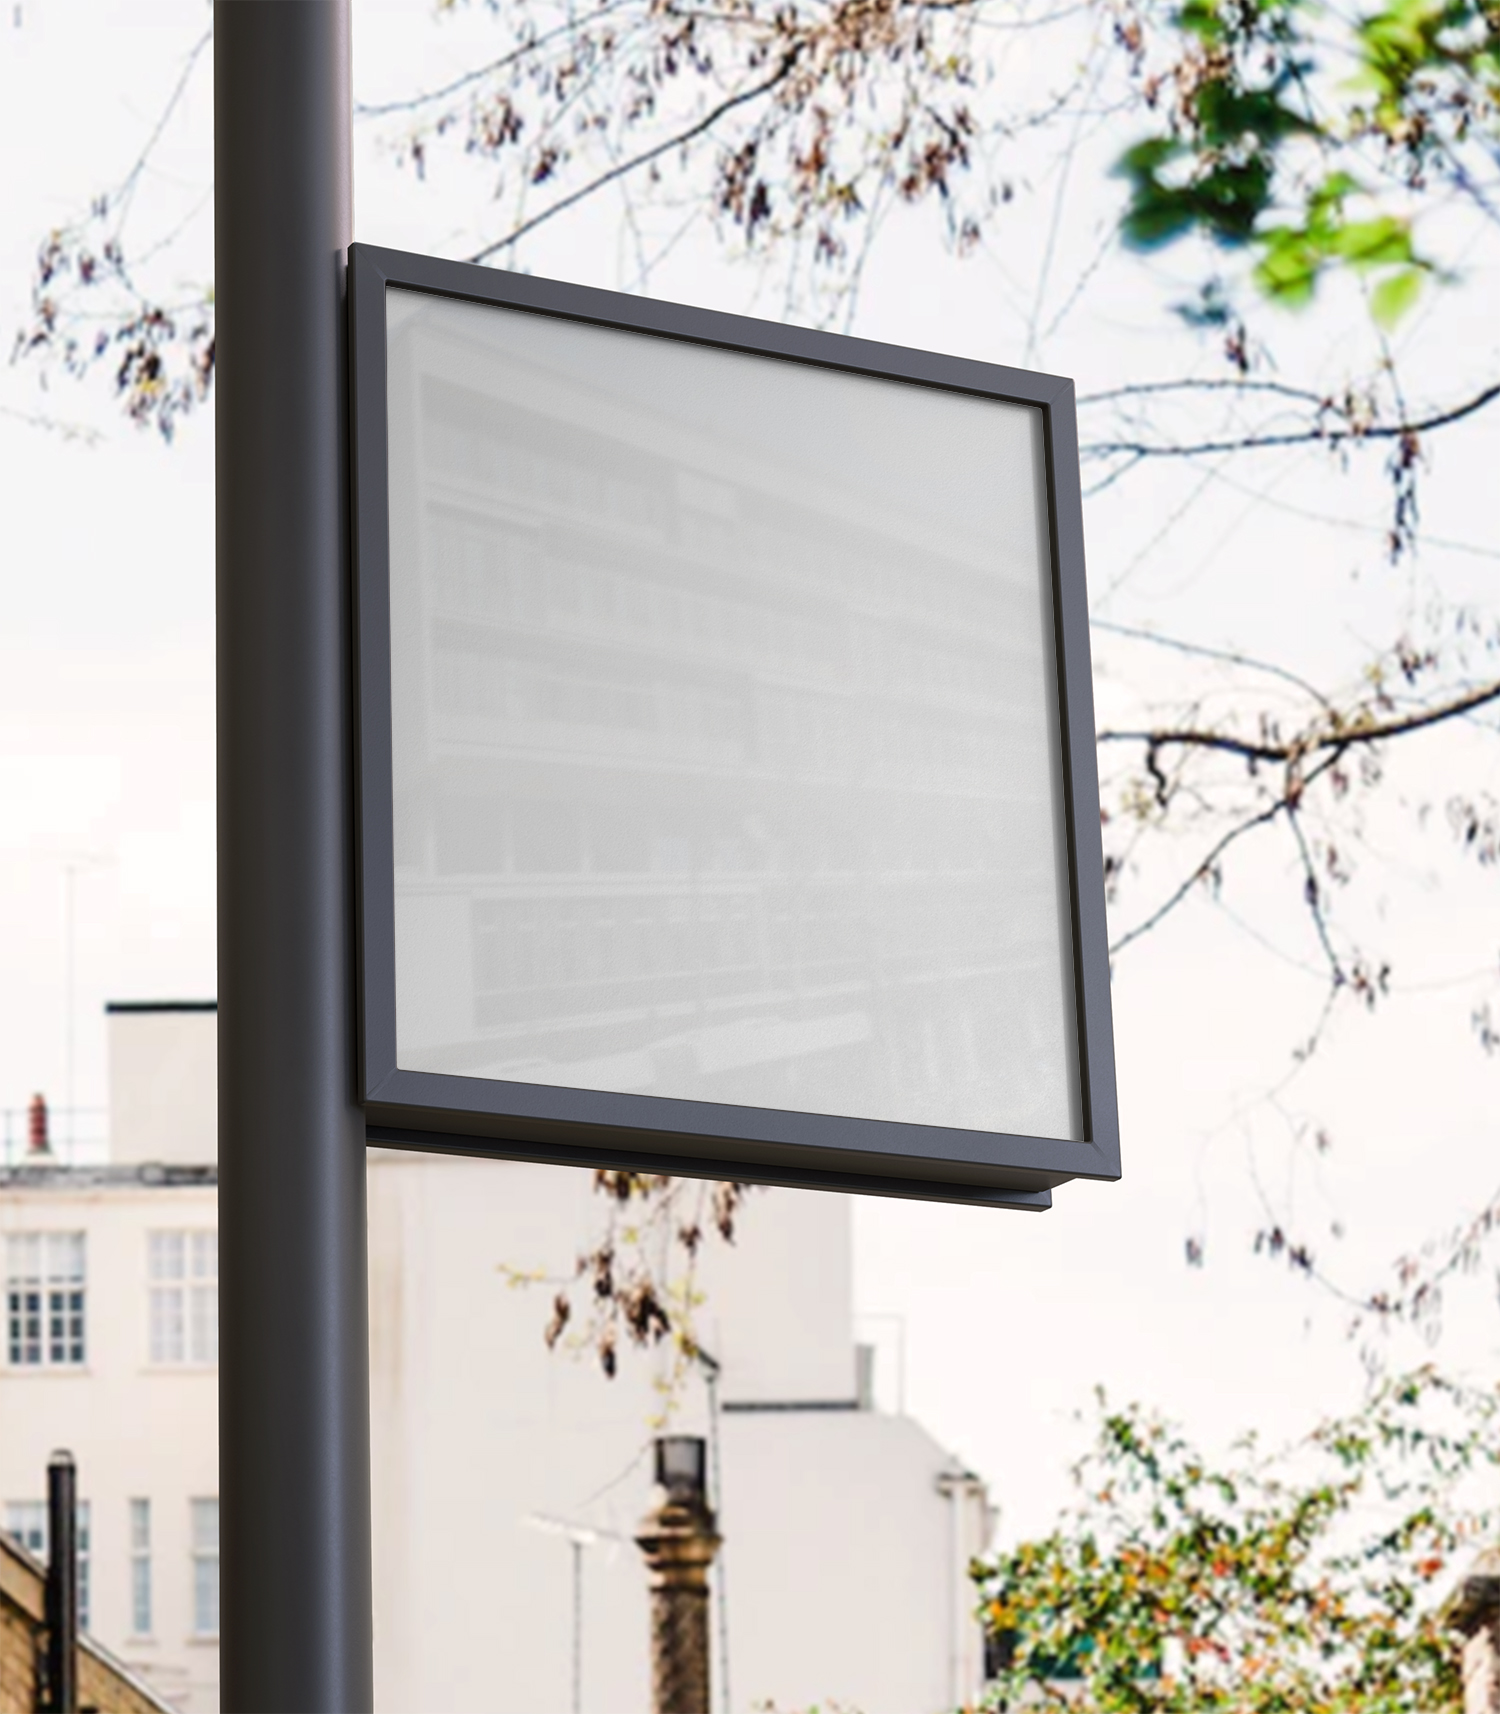 Outdoor Advertising Pole Sign Free Mockup